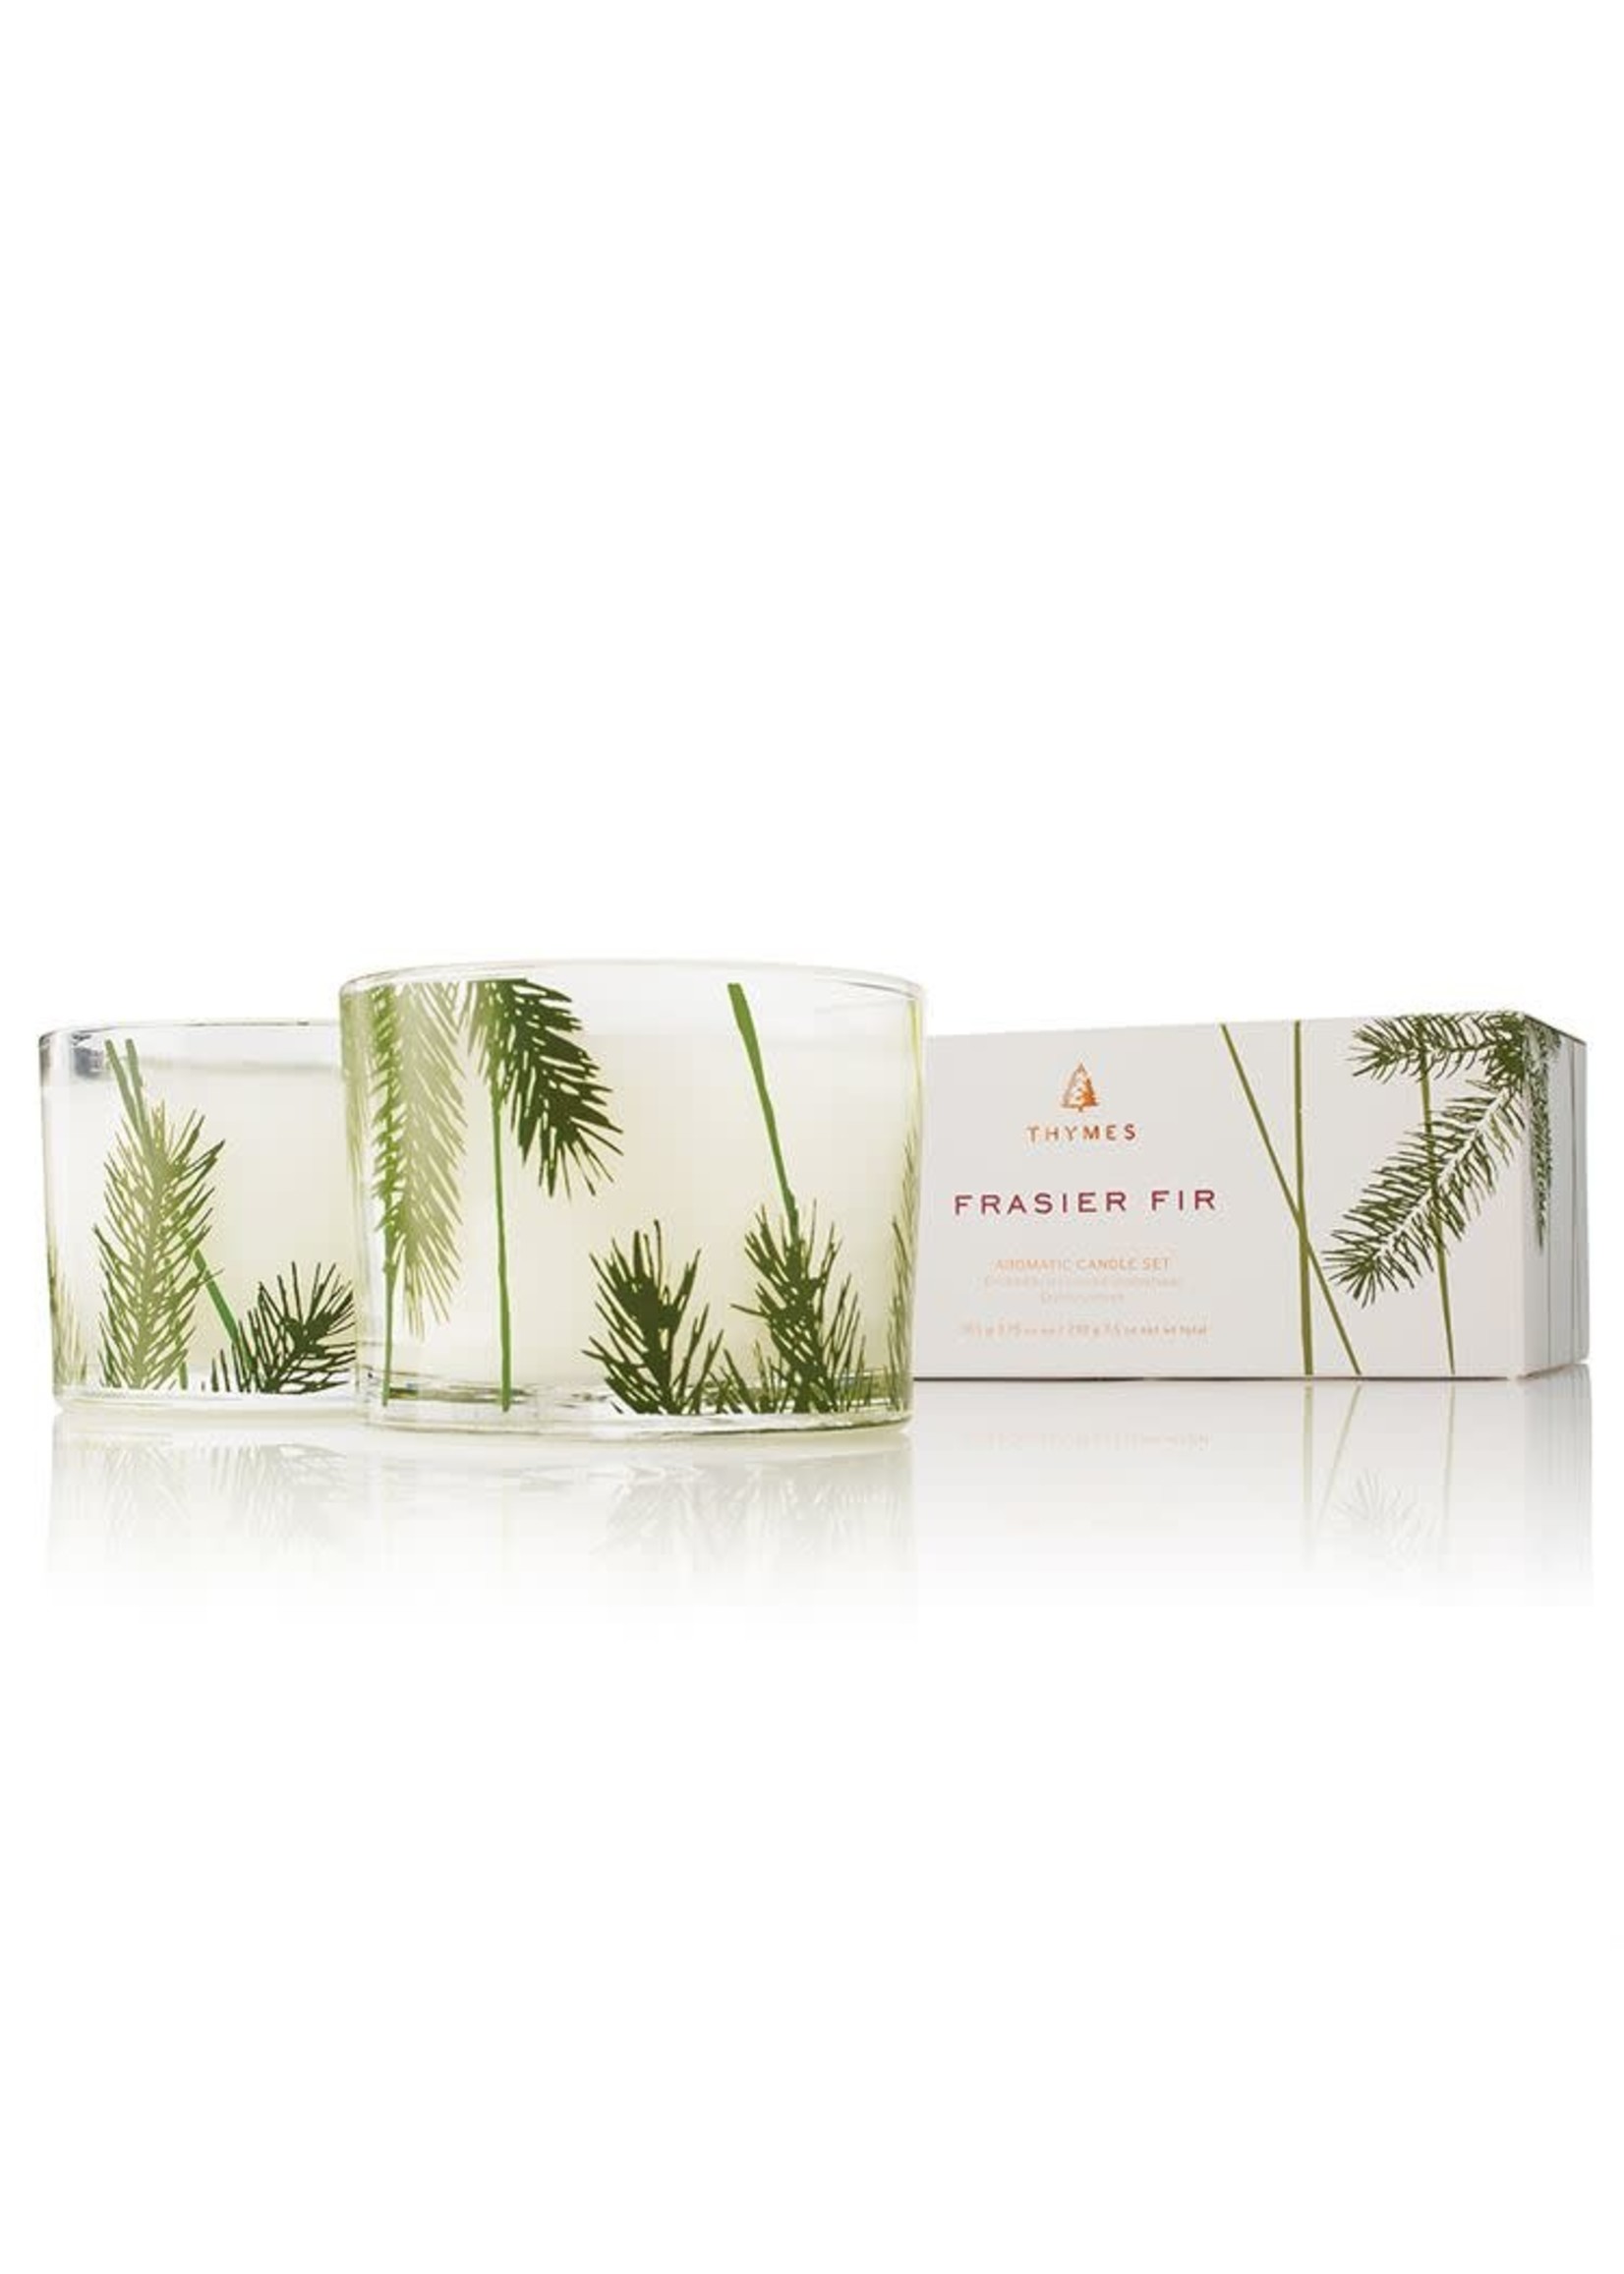 The Thymes Frasier Fir Poured Candle Set, Pine Needle Design